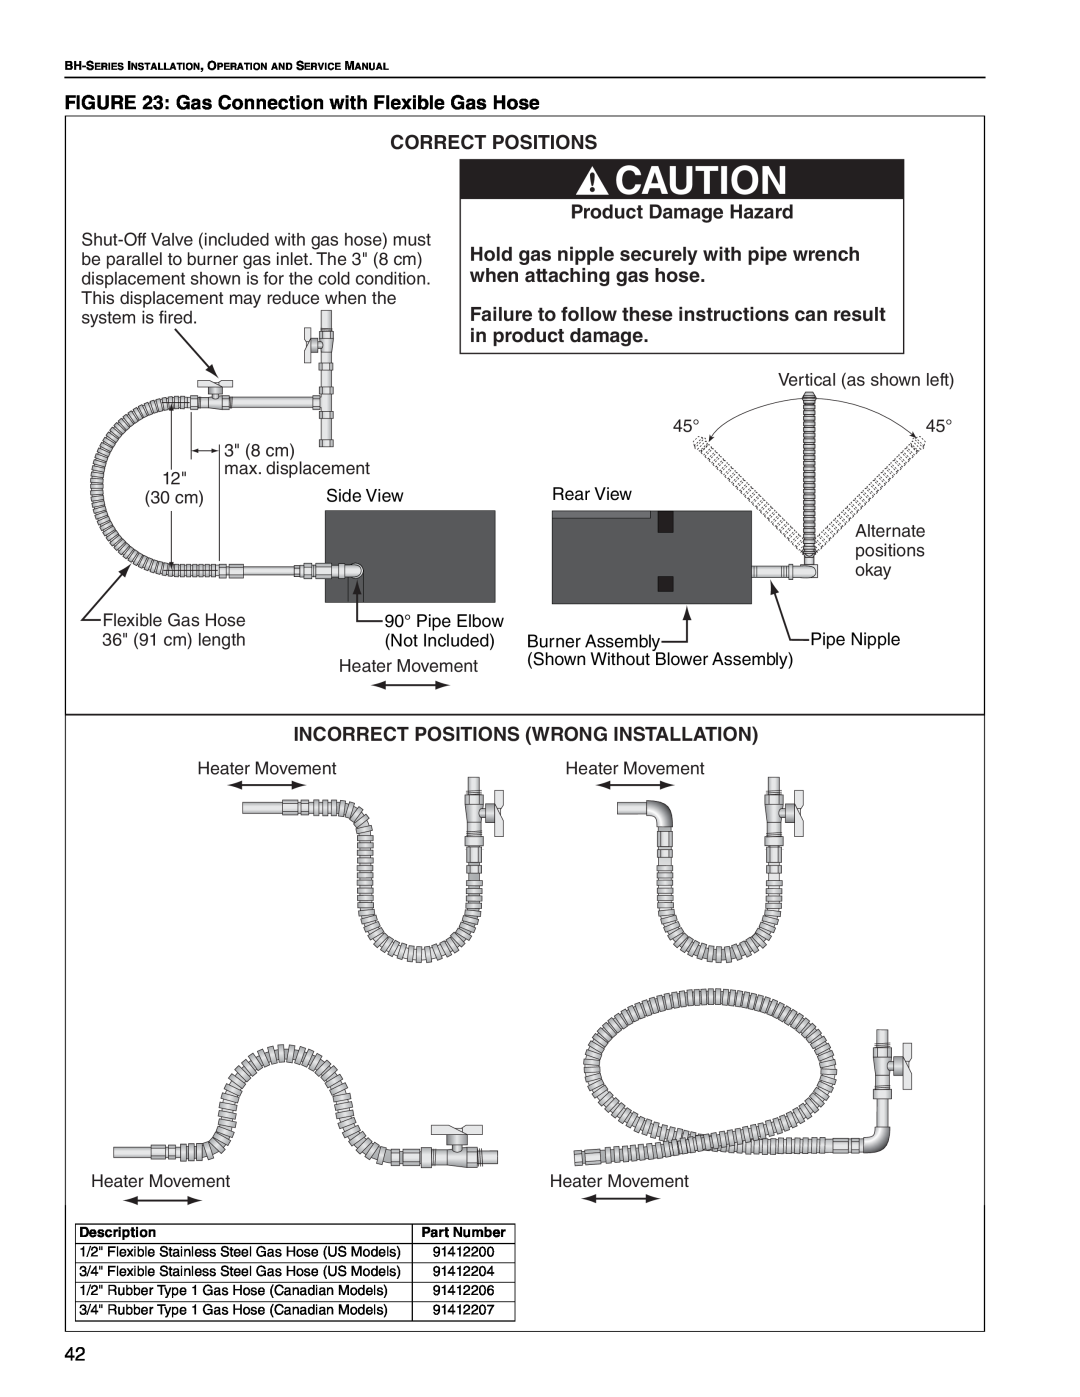 Roberts Gorden Linear Heater manual Gas Connection with Flexible Gas Hose, Correct Positions, Product Damage Hazard 